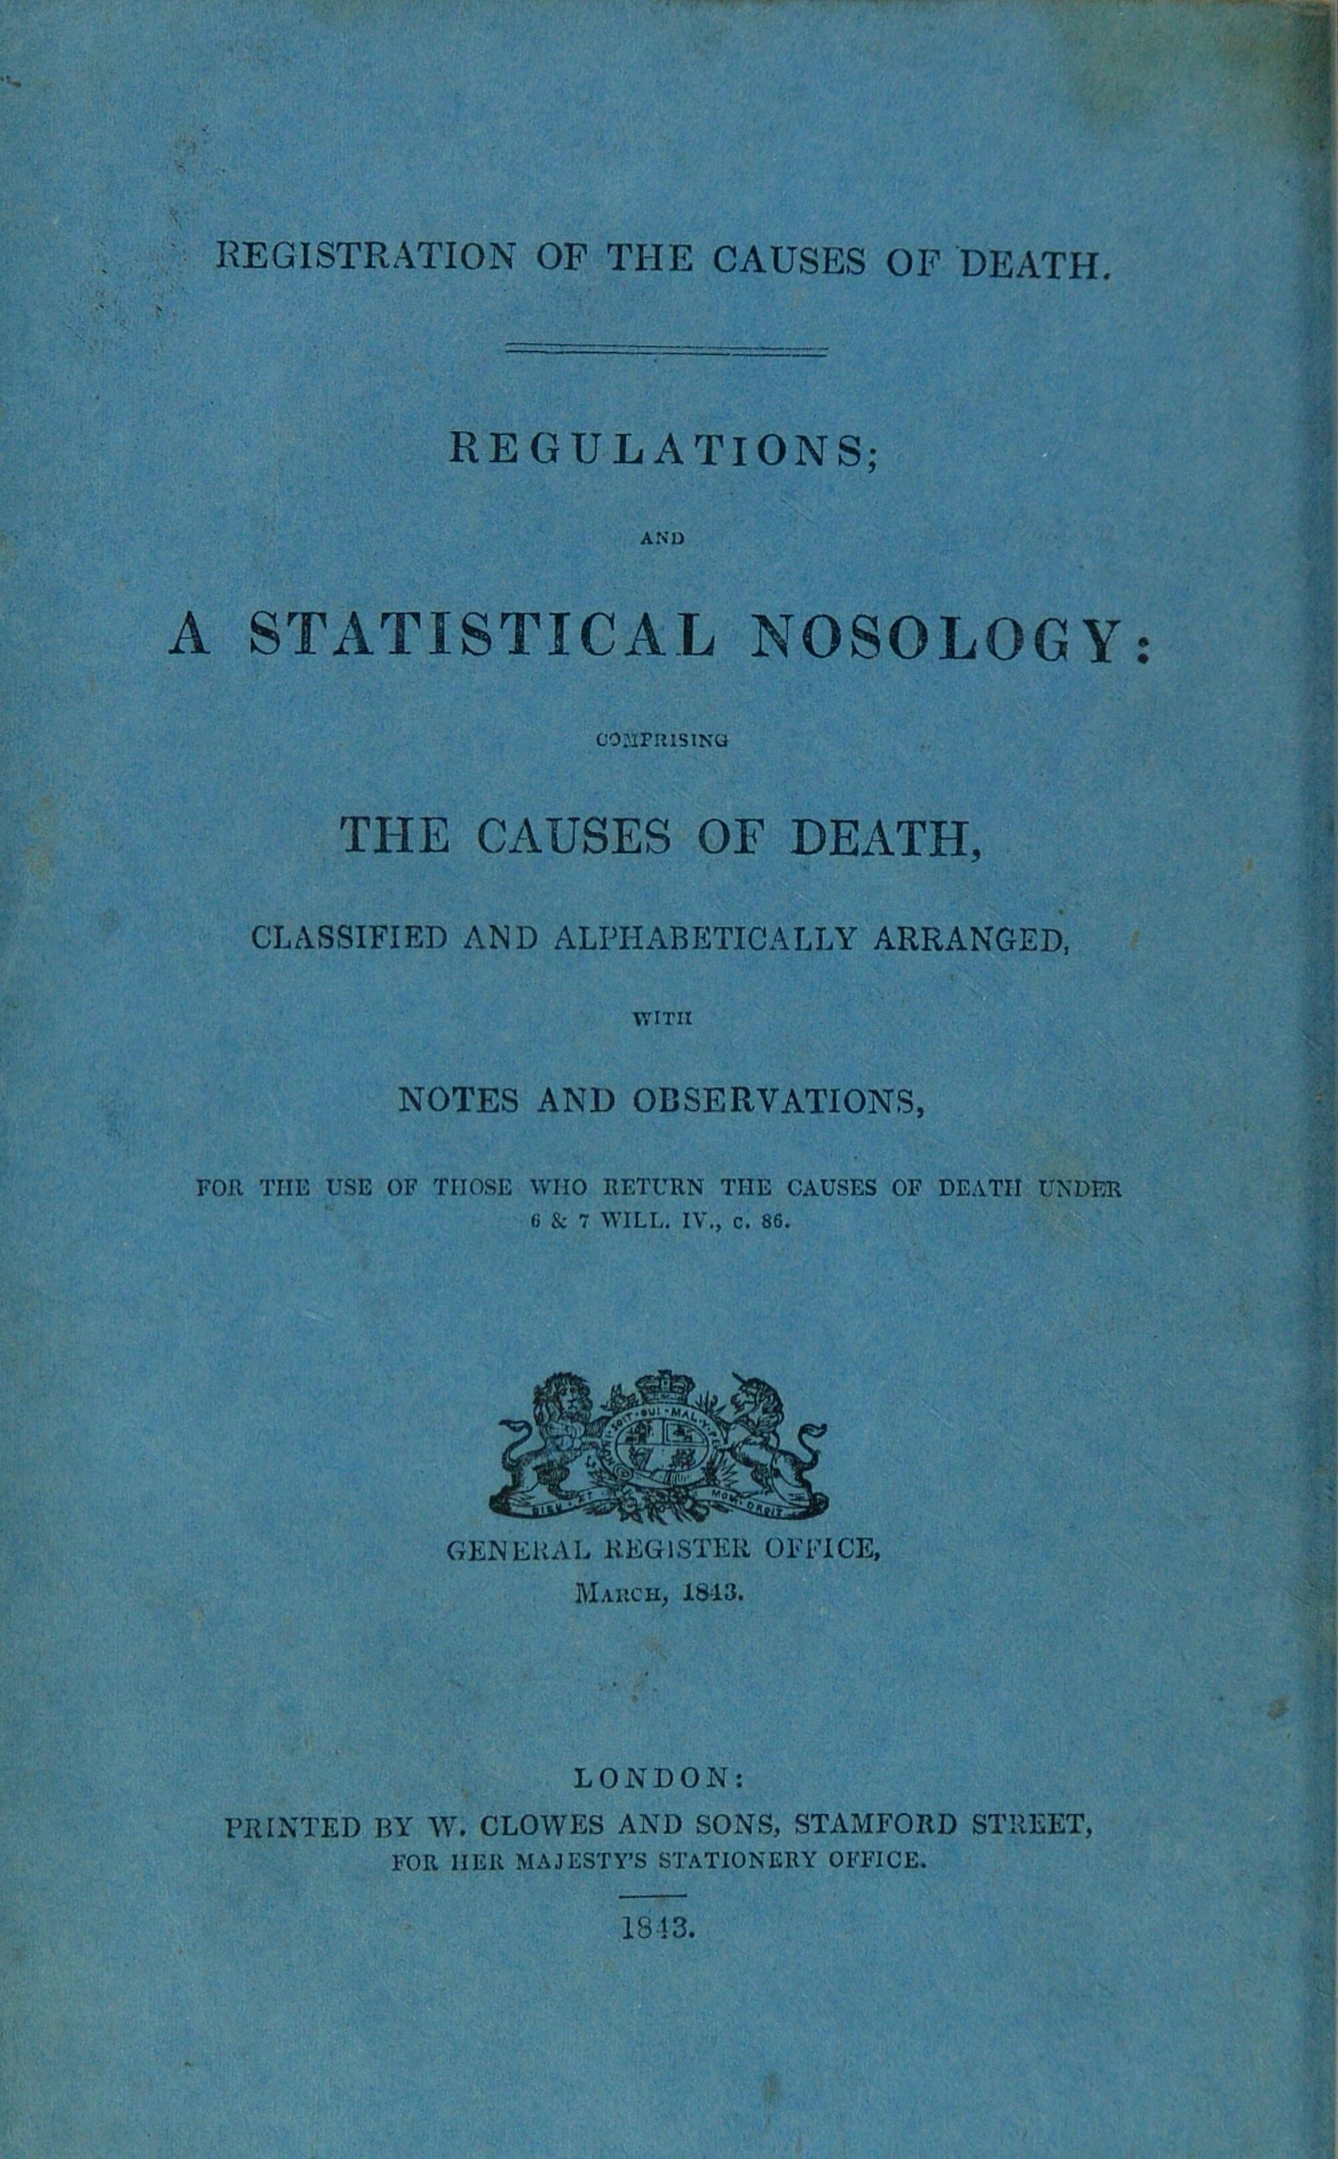 Blue printed cover of the booklet "Regulations and a statistical nosology: comprising the causes of death, classified and alphabetically arranged". It has the mark of the General Register Office. 